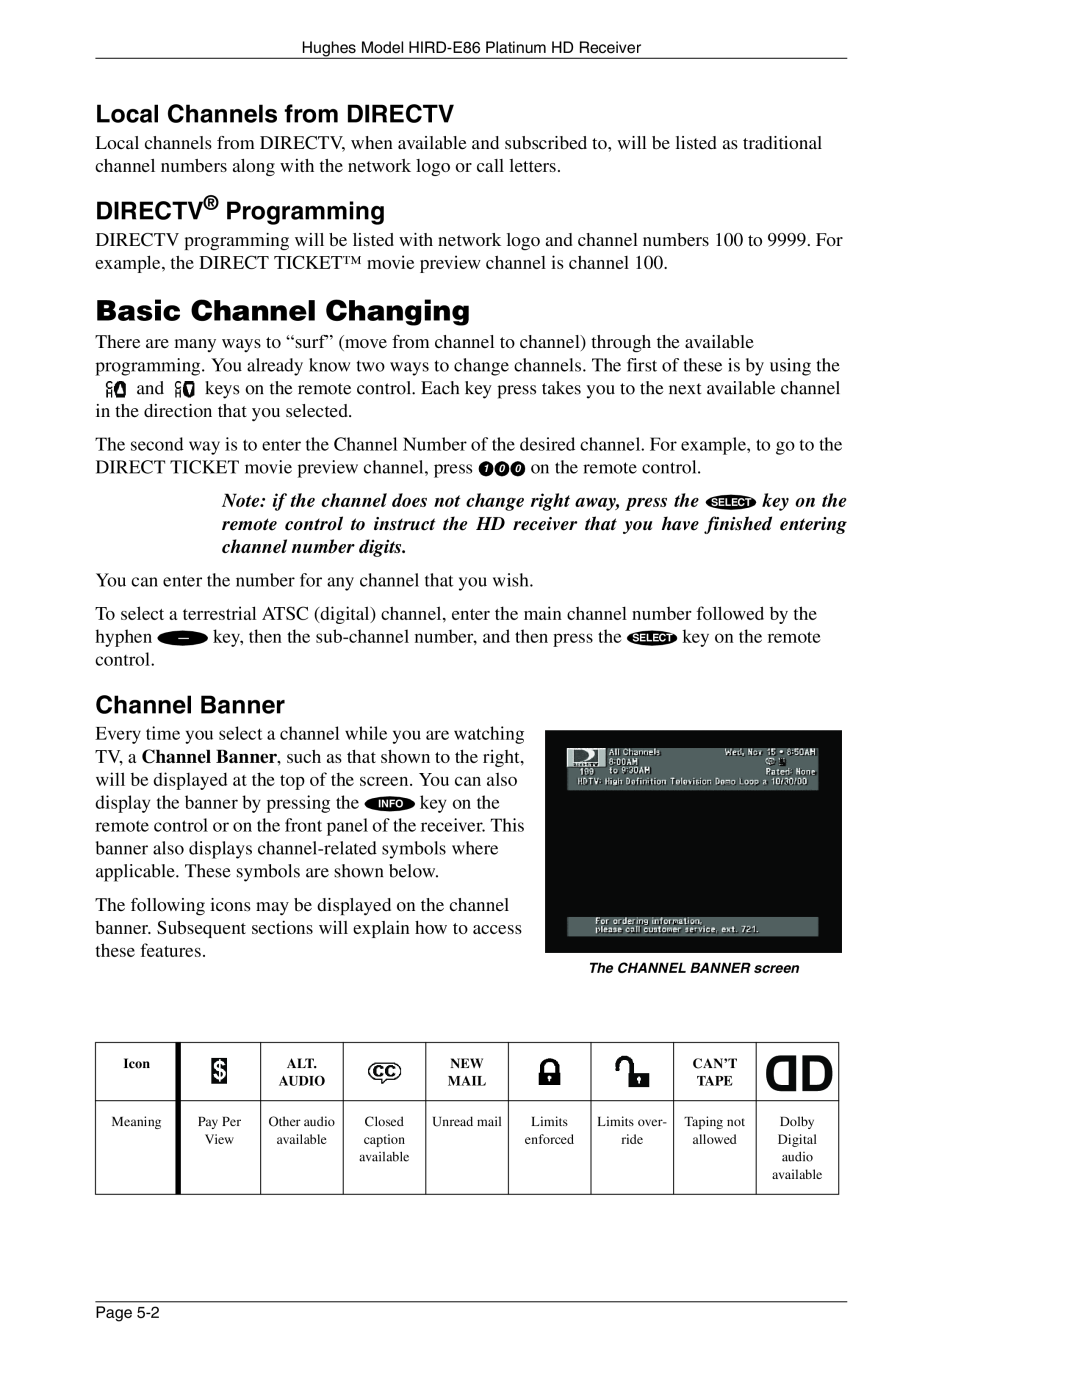 DirecTV HIRD-E86 manual Basic Channel Changing, Local Channels from DIRECTV, DIRECTV Programming, Channel Banner 